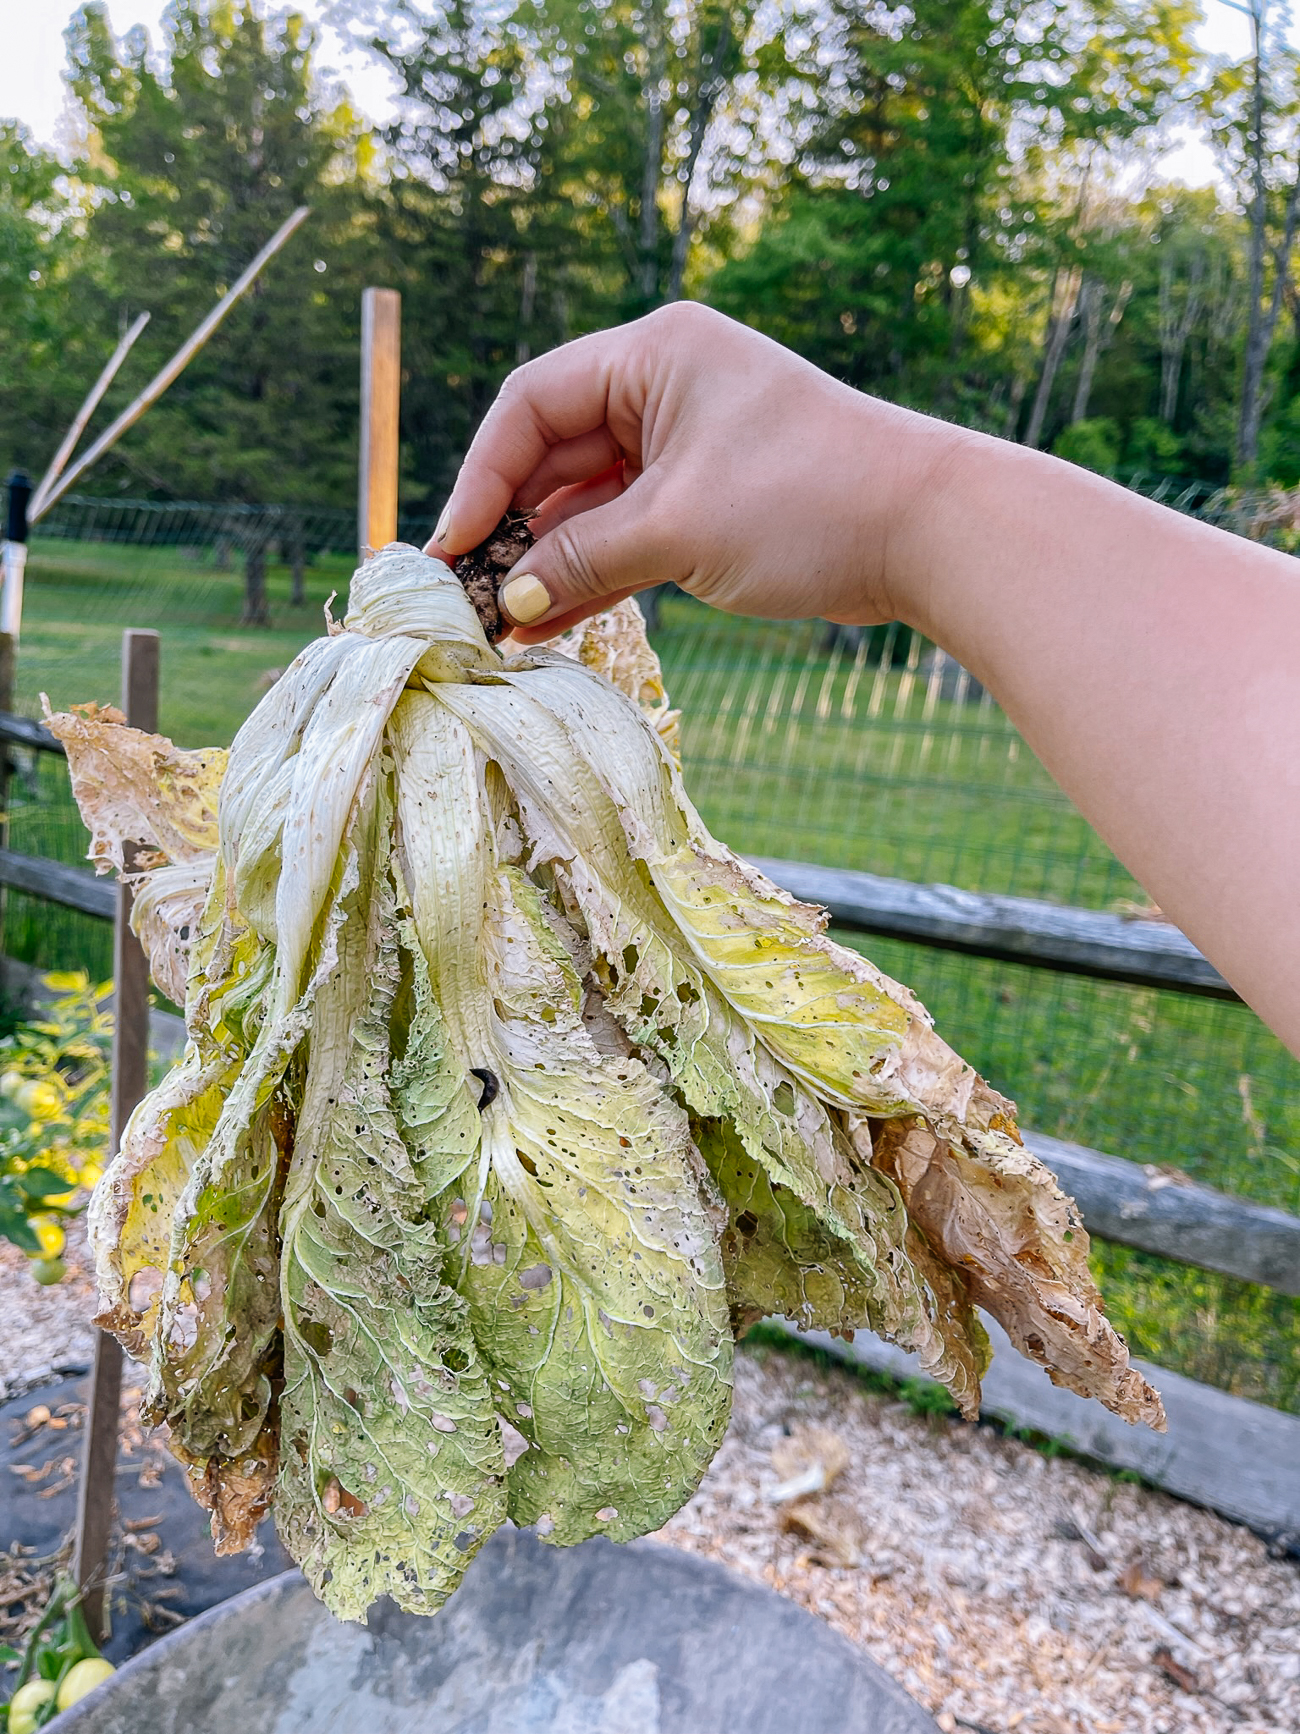 wilted napa cabbage from too much fertilizer